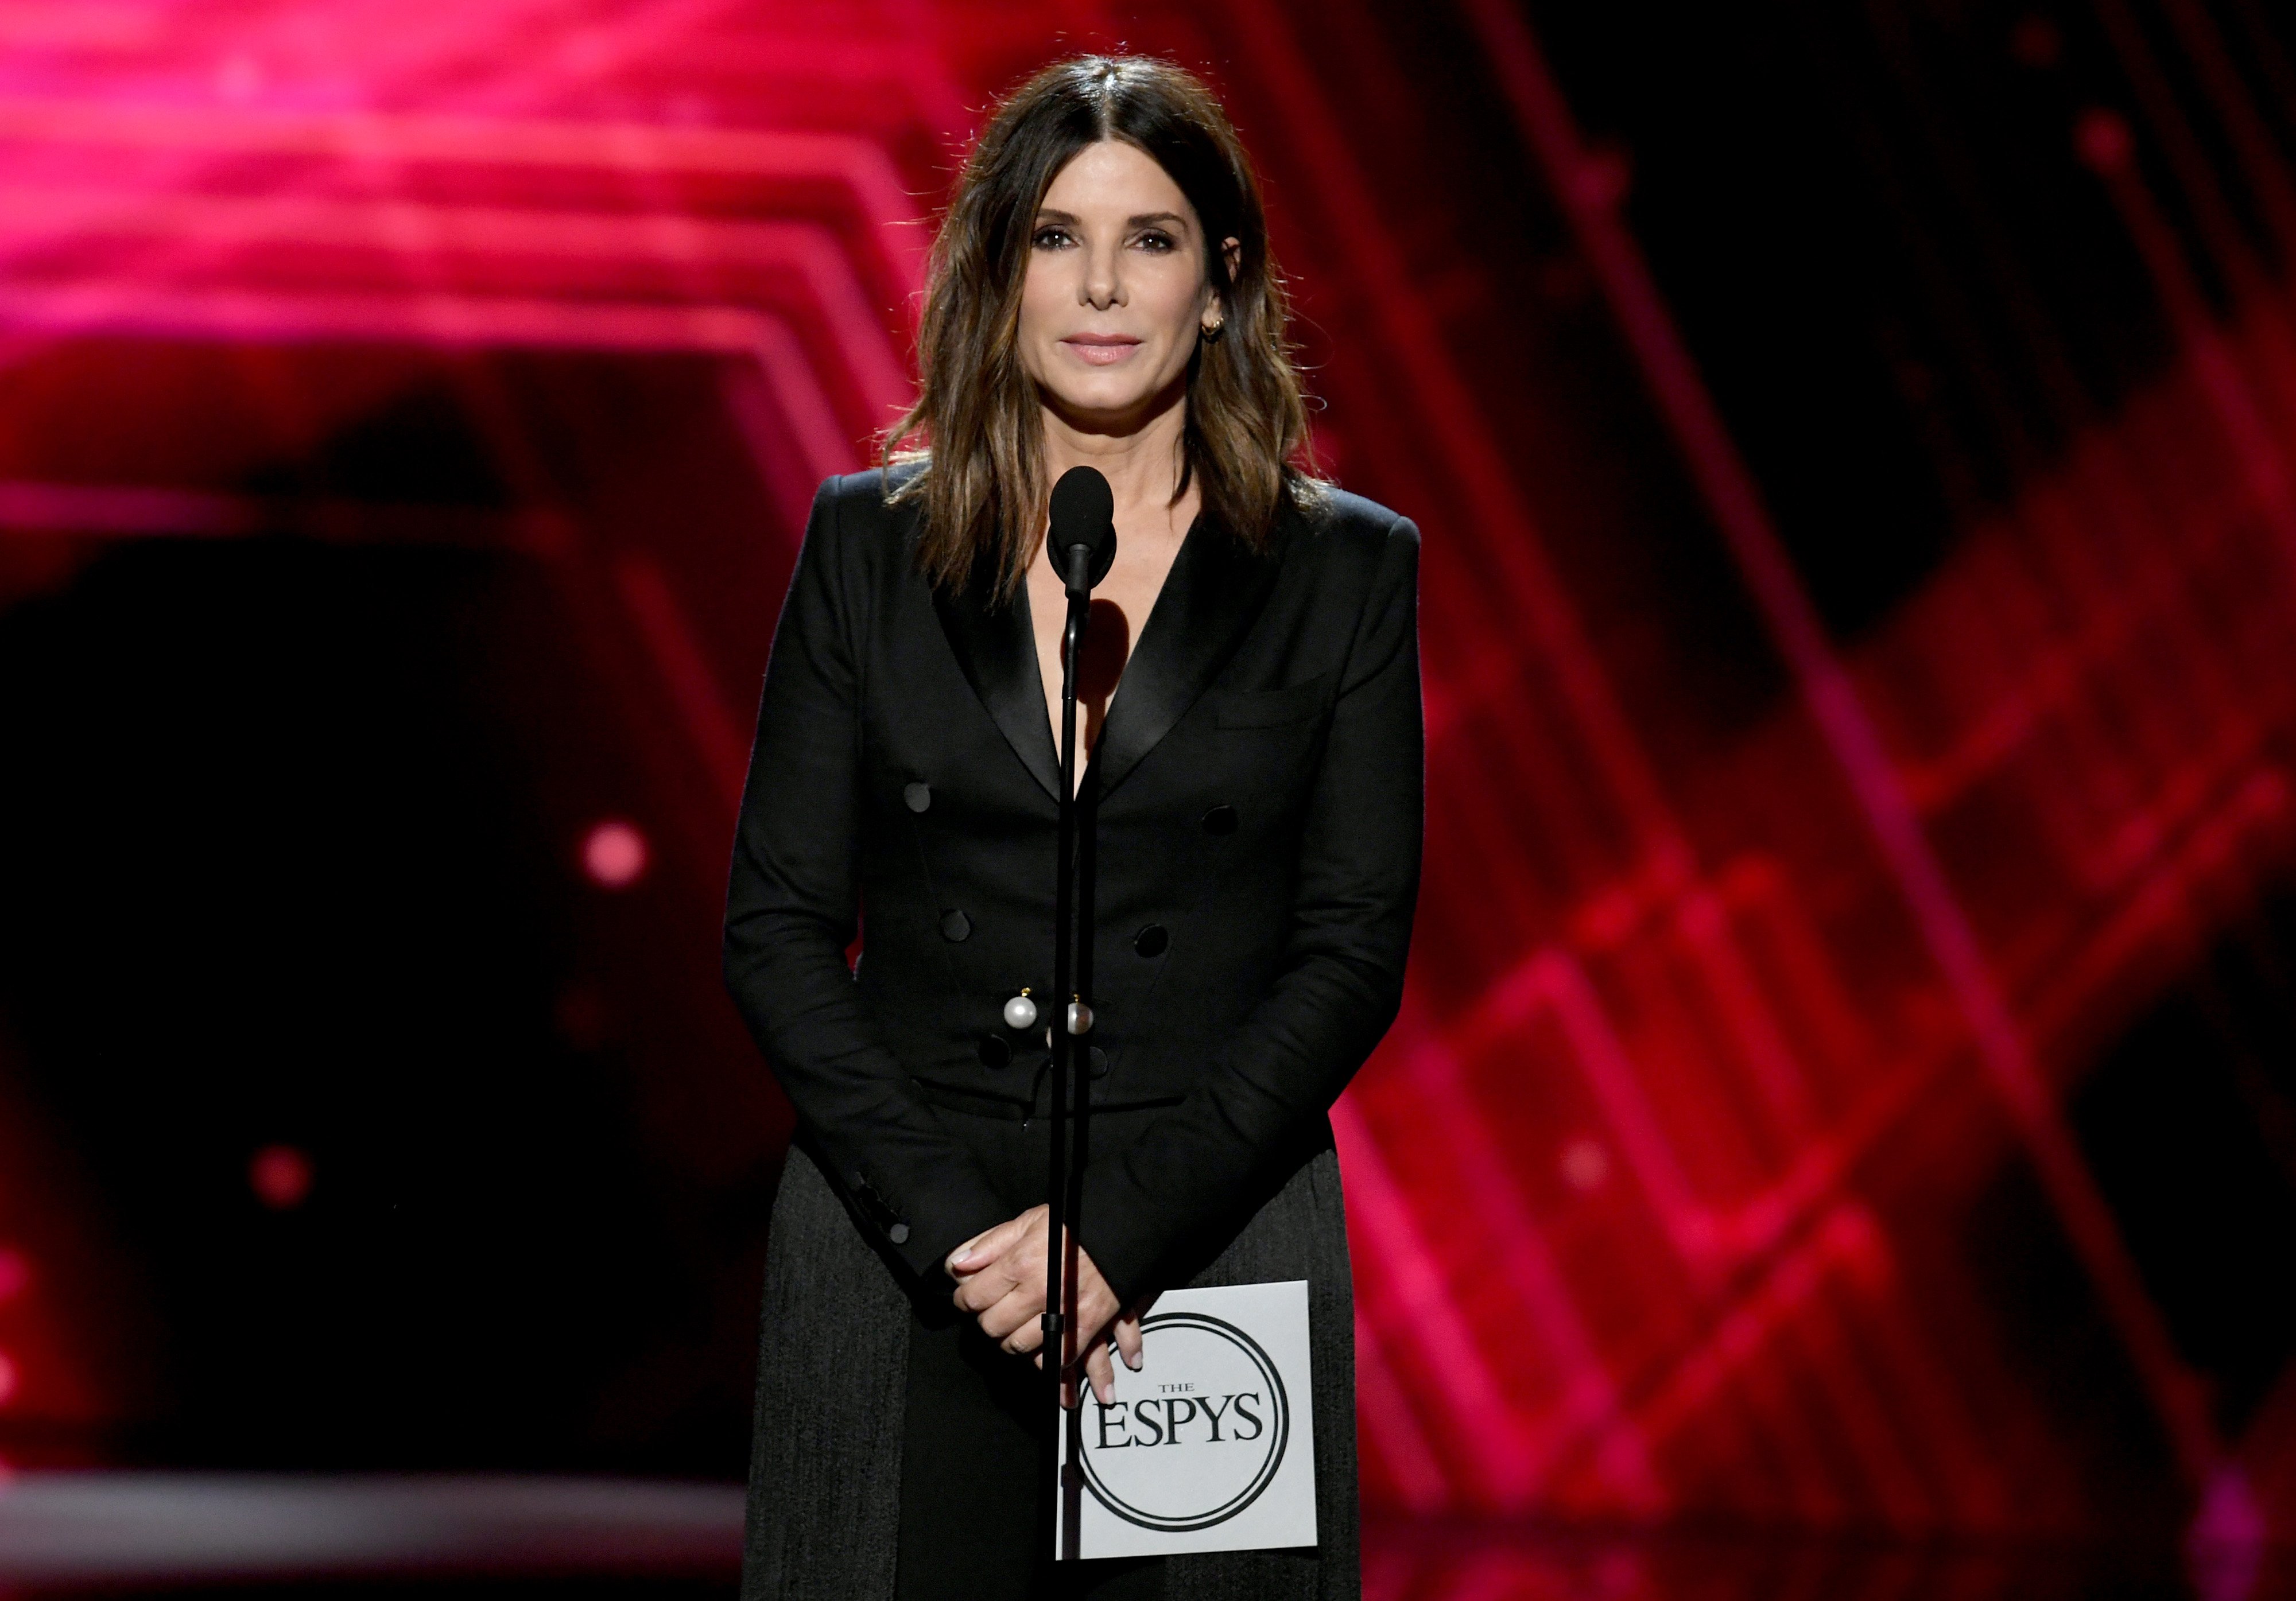 Sandra Bullock speaking onstage during The 2019 ESPYs at Microsoft Theater on July 10, 2019 in Los Angeles, California. / Source: Getty Images